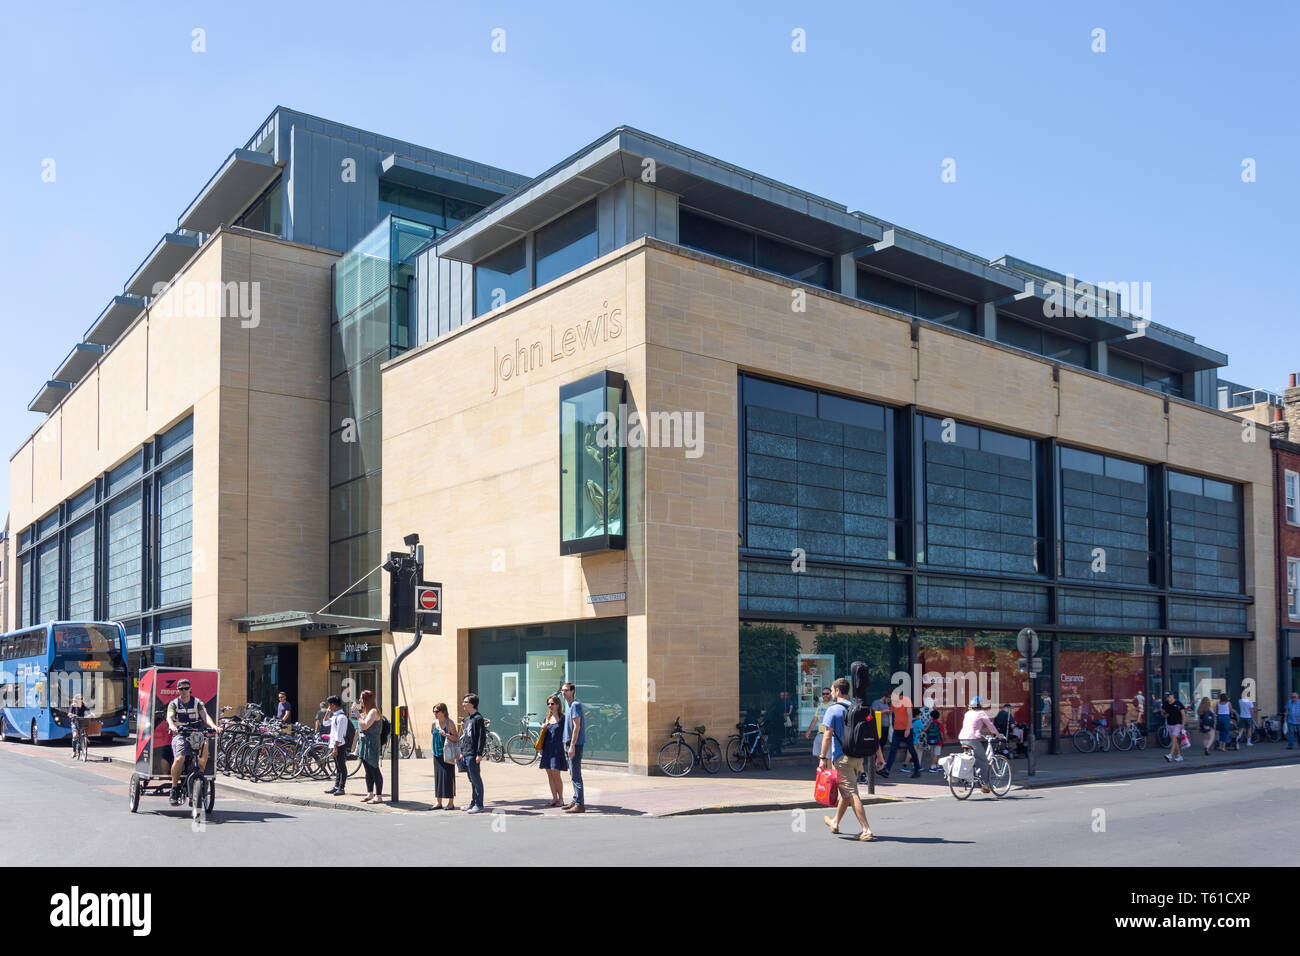 John Lewis & Partners & Partners department store, Grand Arcade, Downing Street, Cambridge, Cambridgeshire, Angleterre, Royaume-Uni Banque D'Images